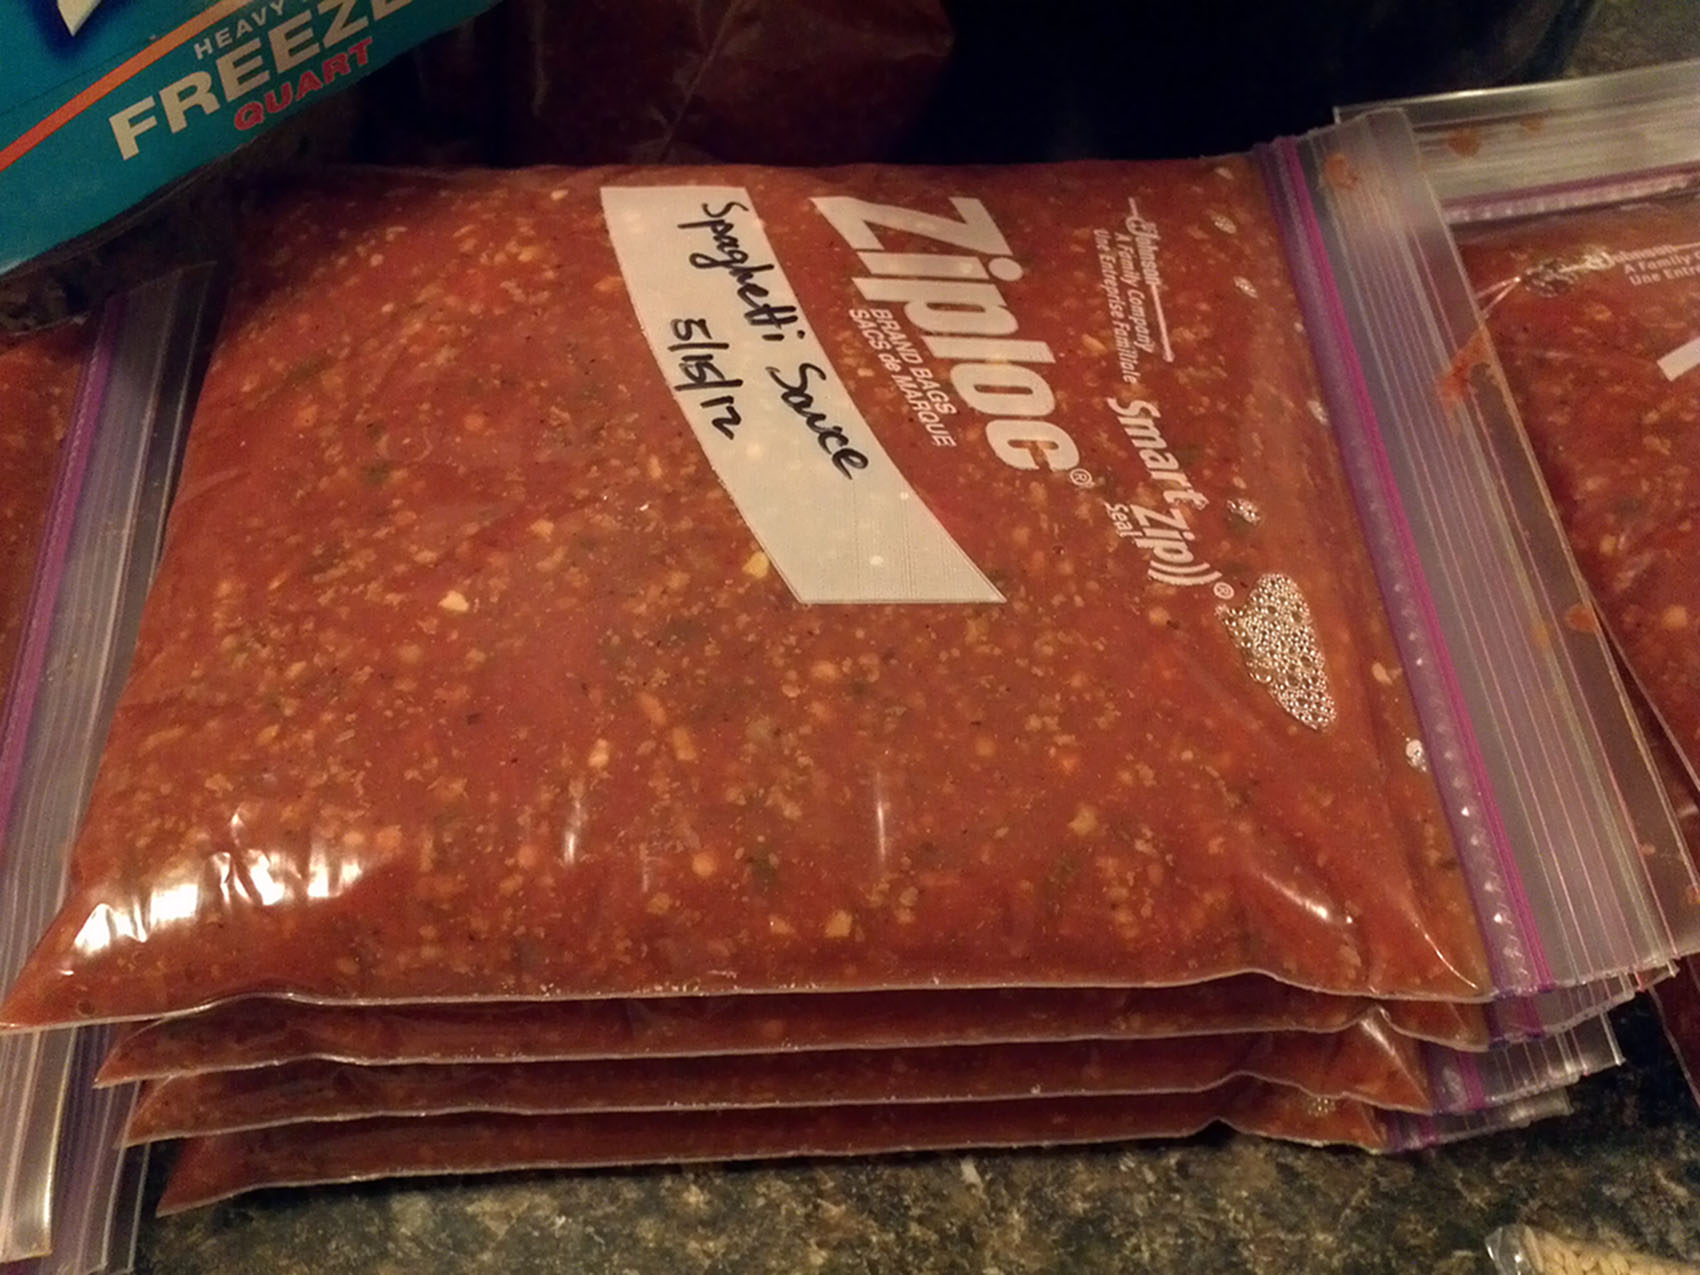 How To Freeze Spaghetti Sauce & Meatballs In Zip Storage Bag Without Mess